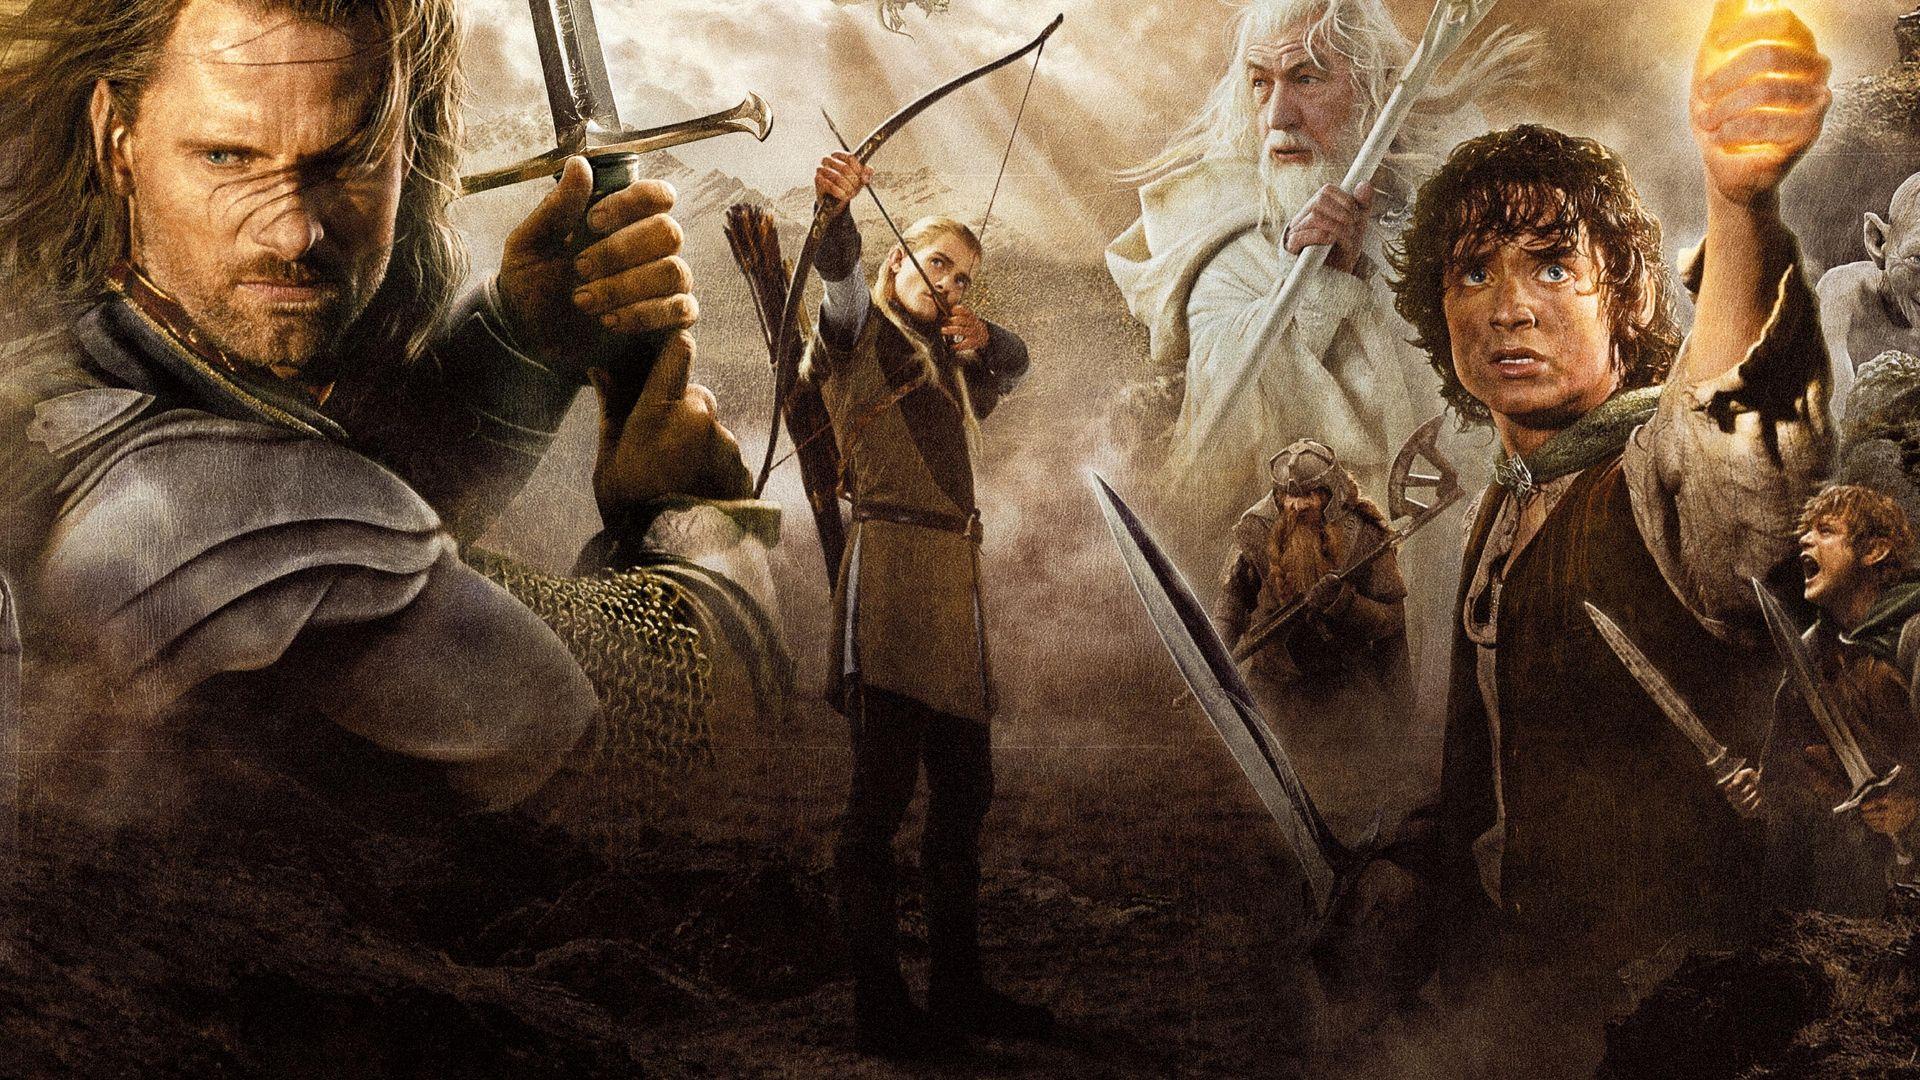 The Lord Of The Rings Wallpaper High Quality